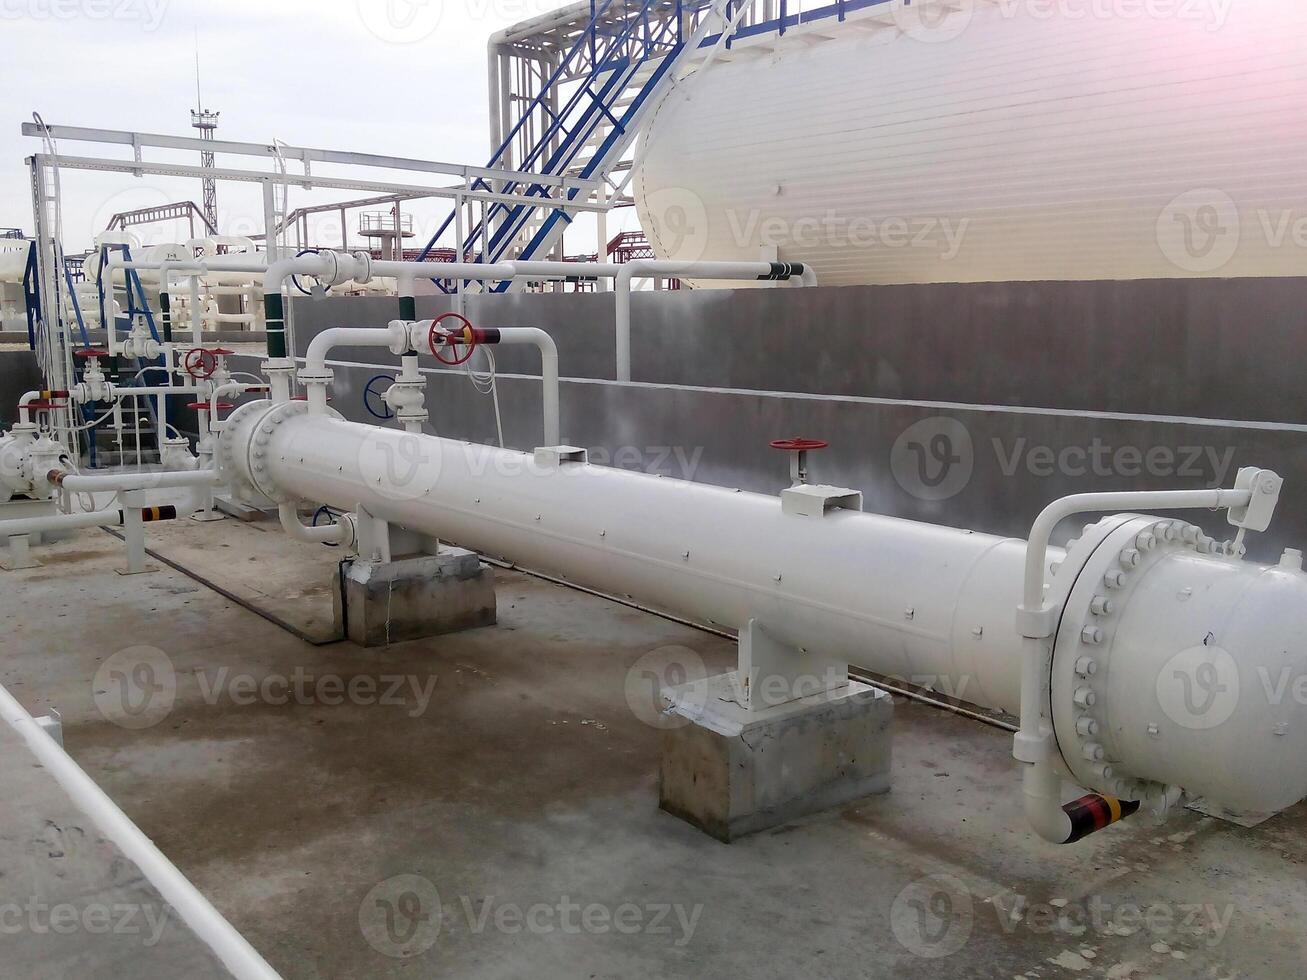 Heat exchanger in a refinery photo